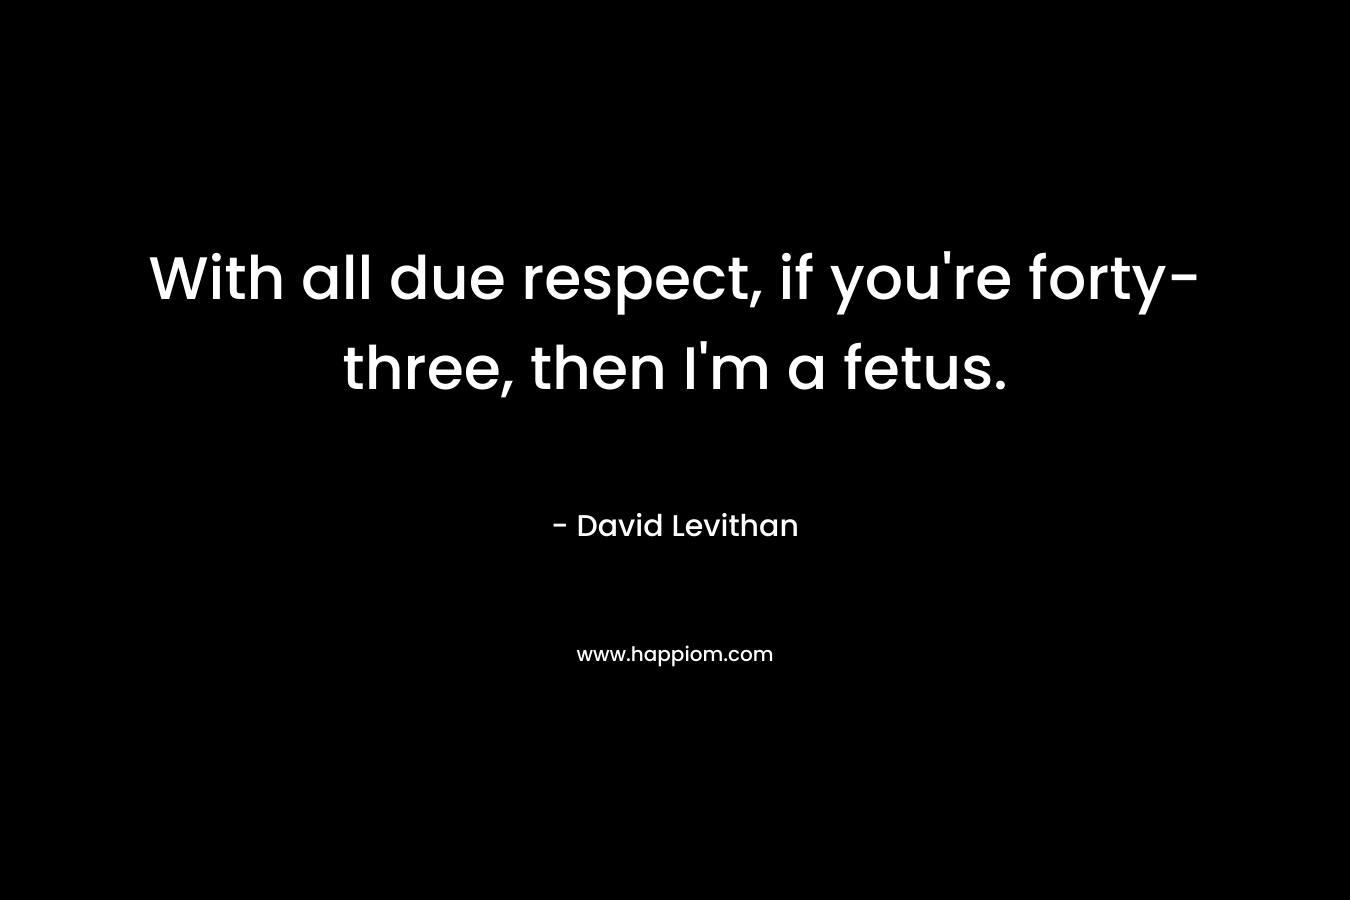 With all due respect, if you’re forty-three, then I’m a fetus. – David Levithan